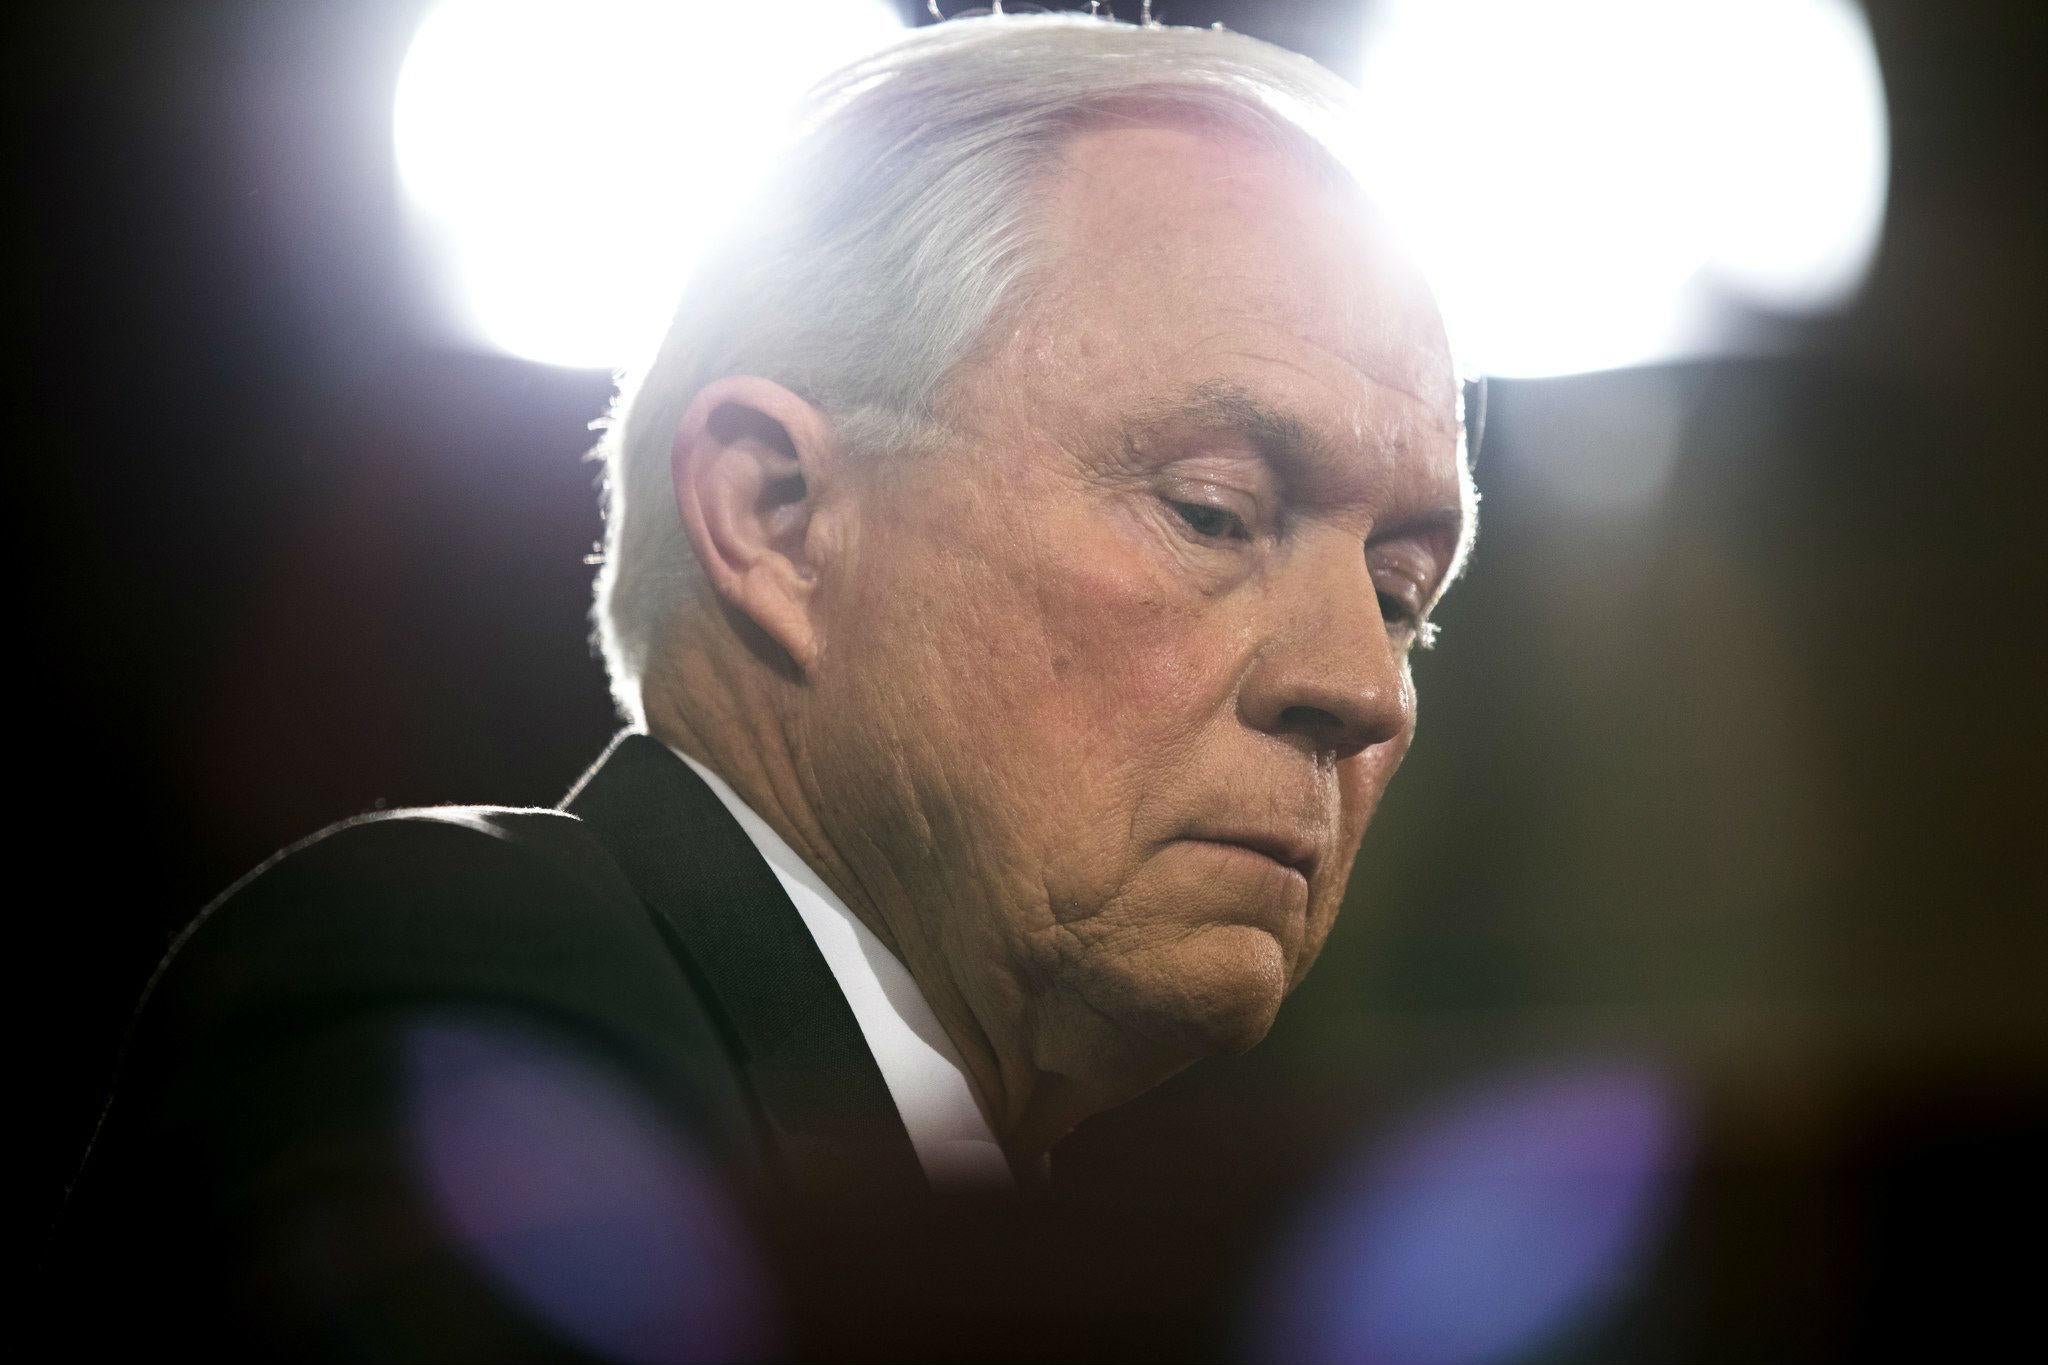 Jeff Sessions has maintained that he has done nothing wrong